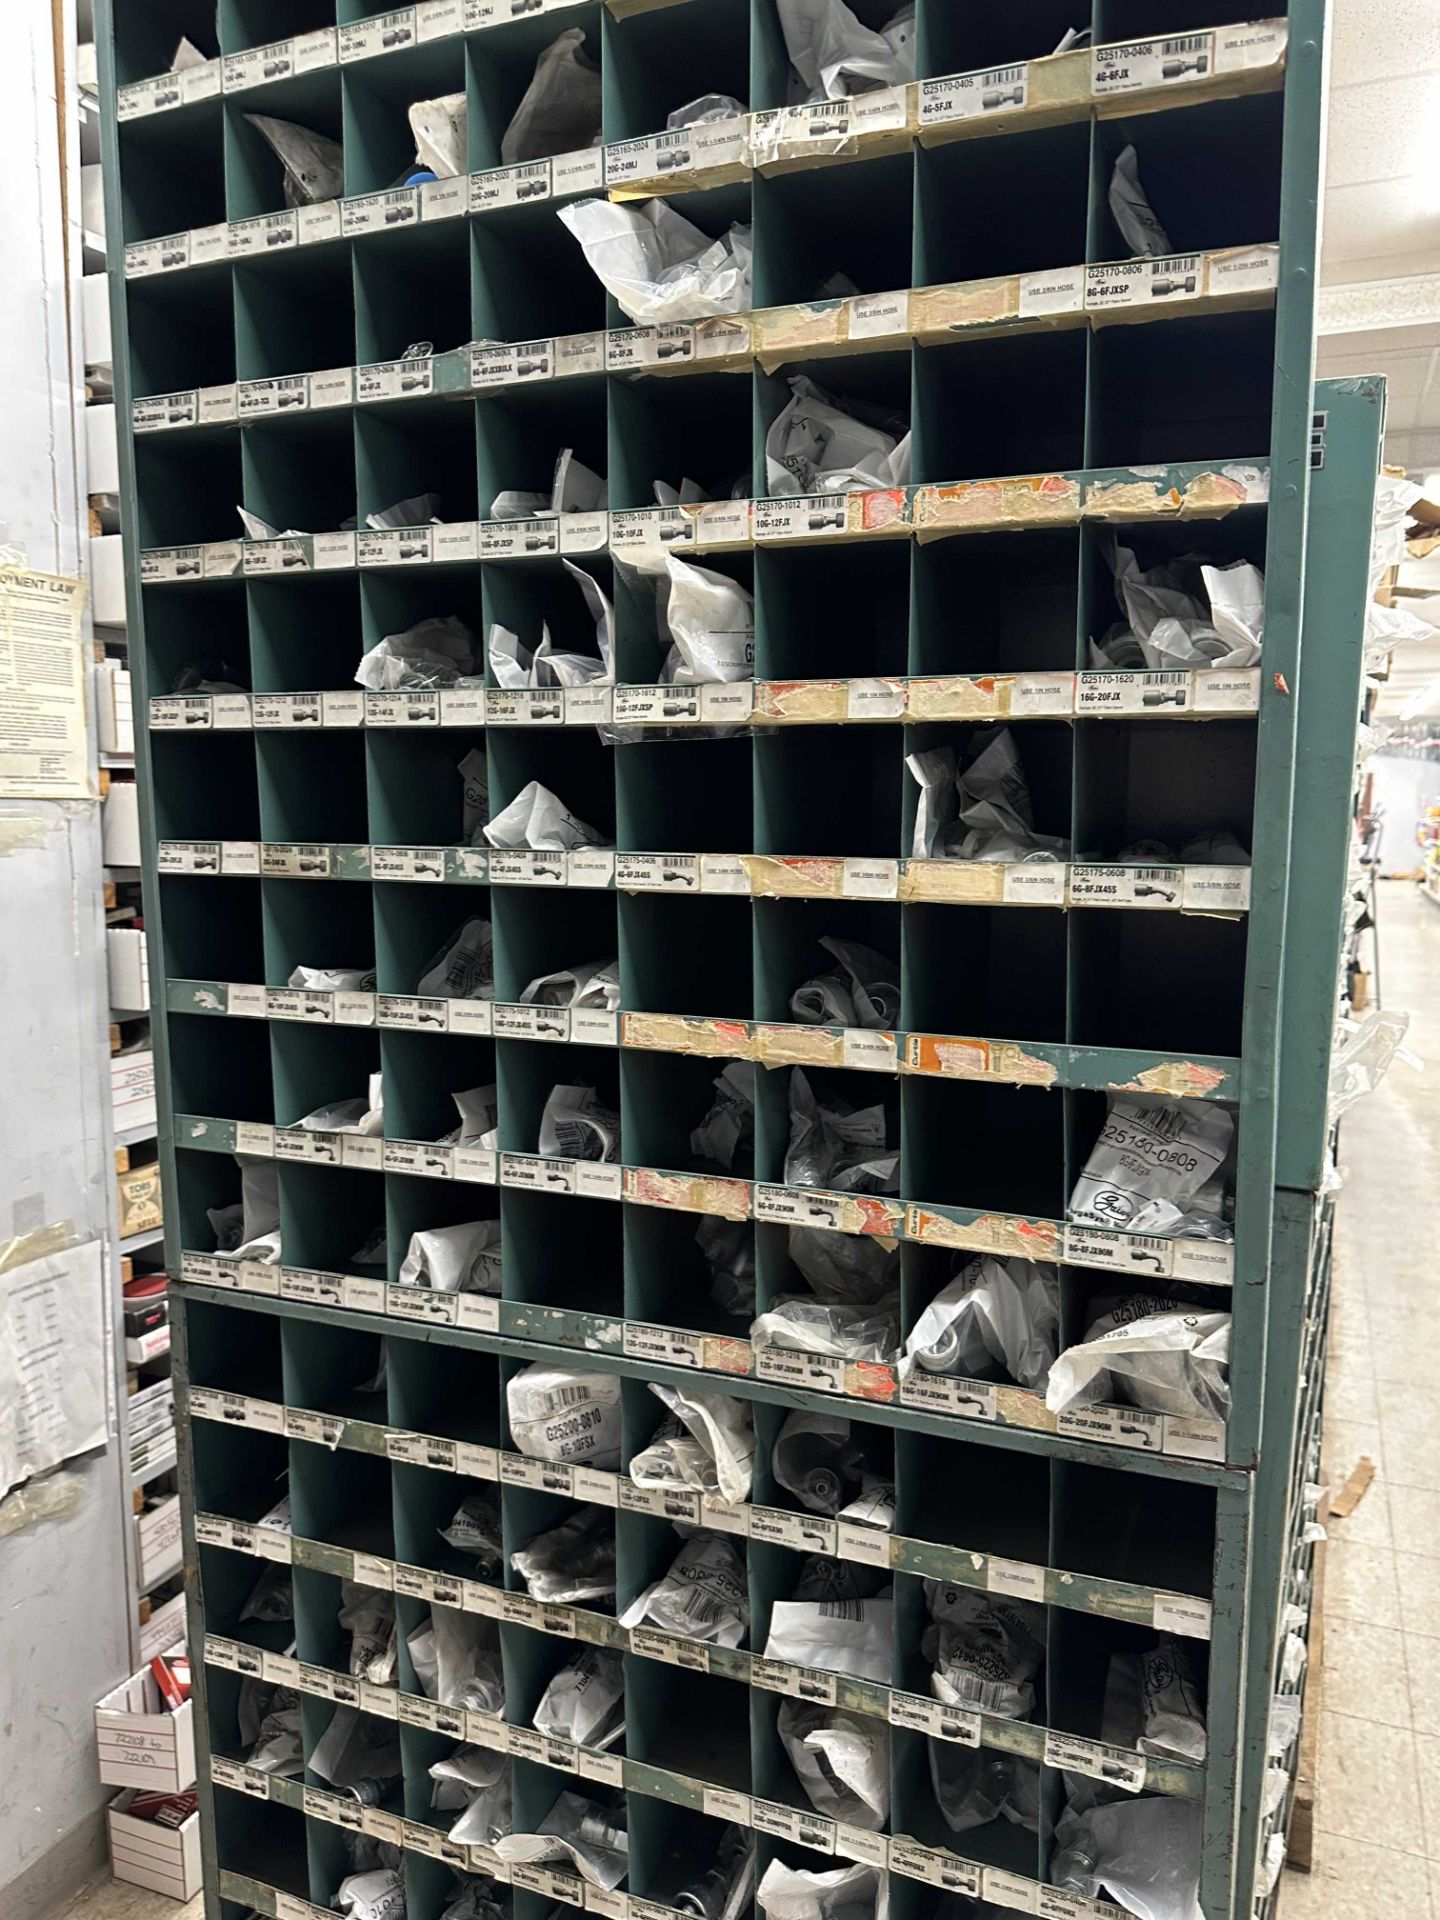 {LOT} 3 Cabinets Gates Hardware - Appx 1361 Pcs, $17,700.00 Wholesale Cost - Image 2 of 3